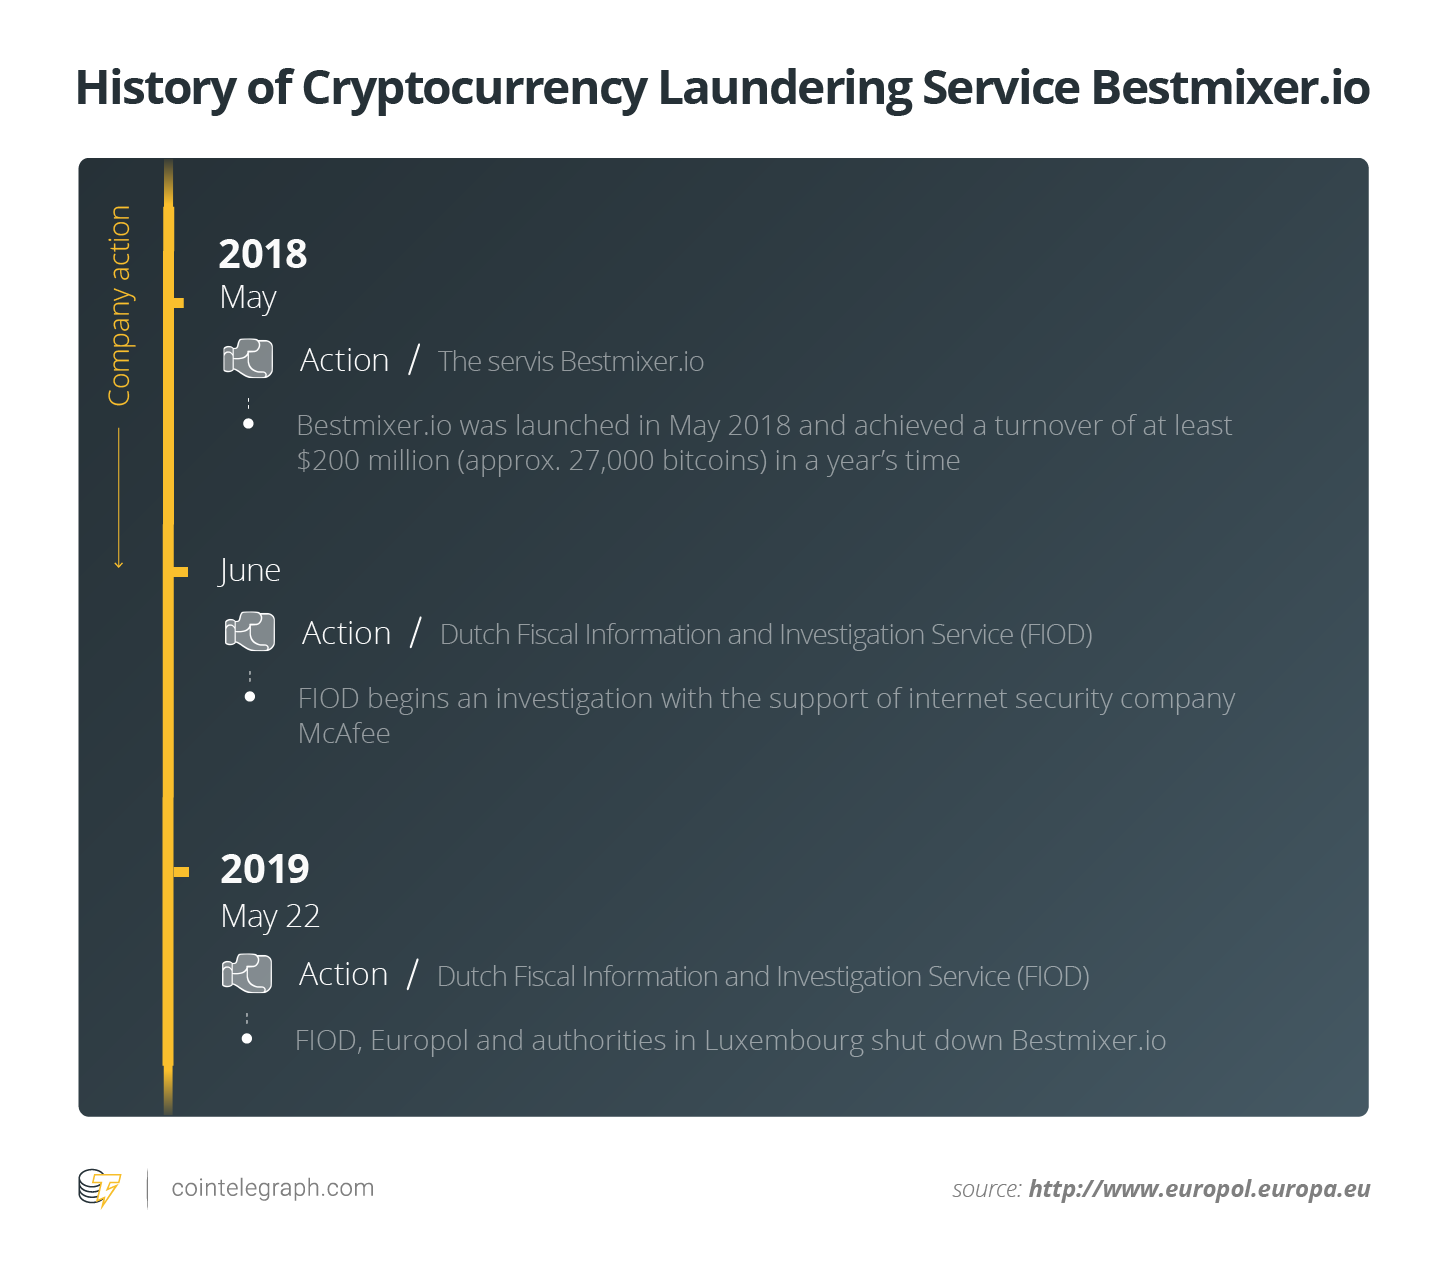 History of Cryptocurrency Laundering Service Bestmixer.io